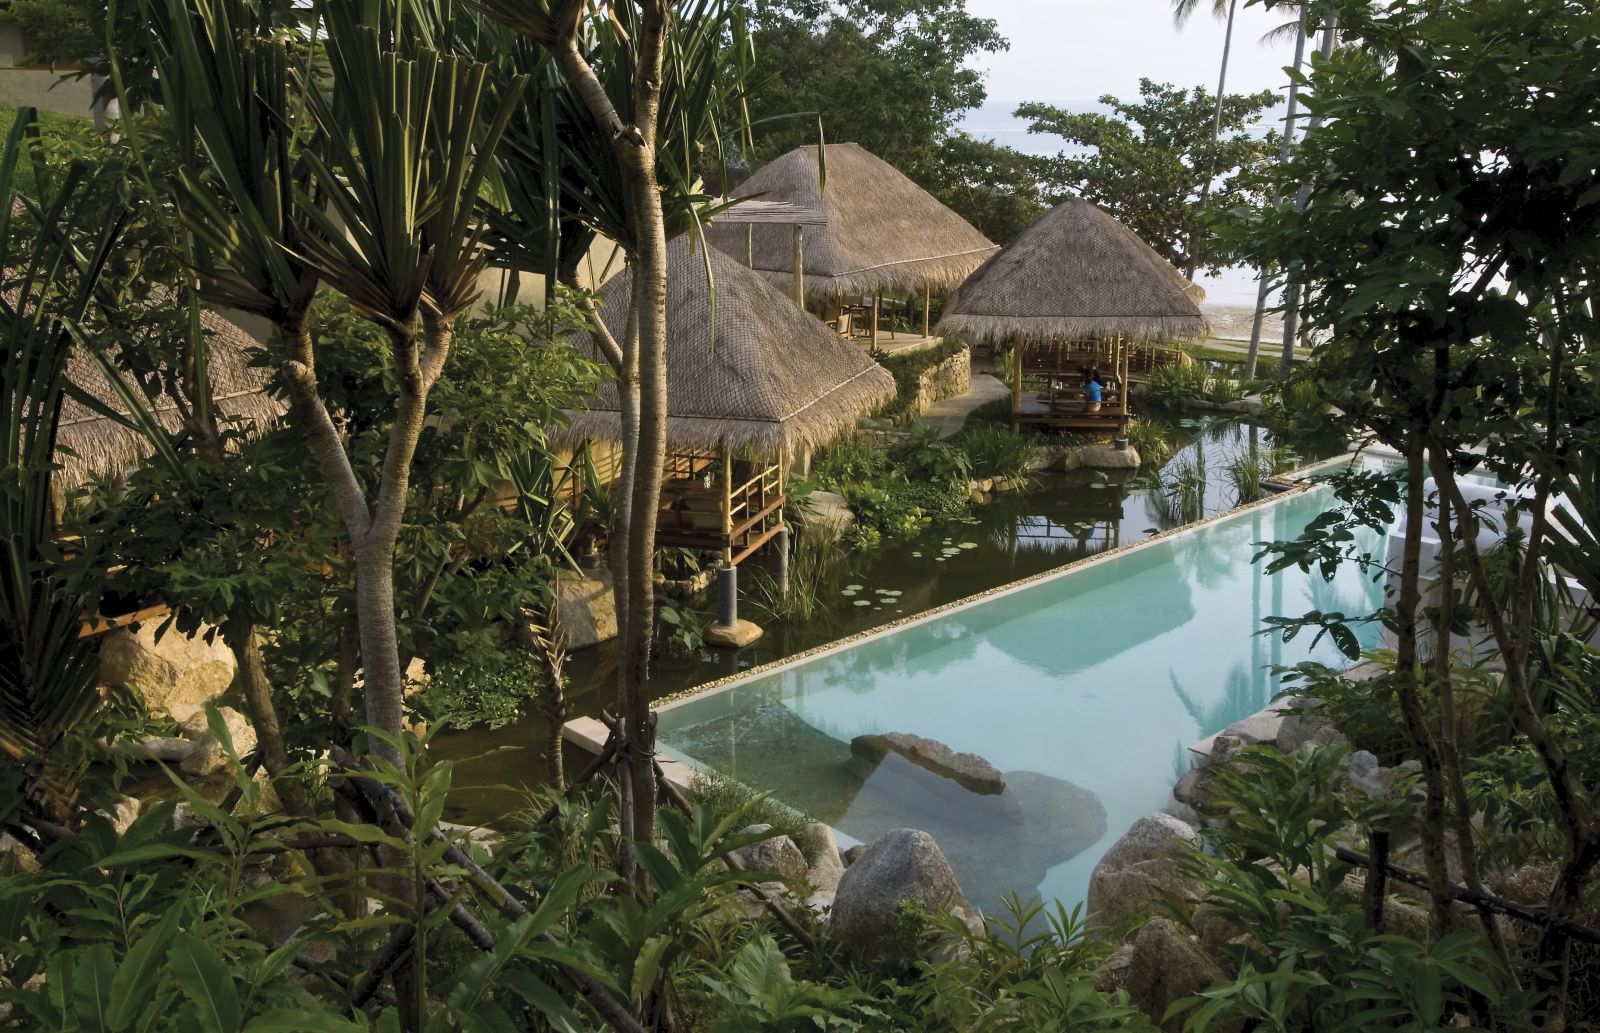 Pool and rooms hidden in the lush gardens at at luxury wellness resort Kamalaya in Thailand